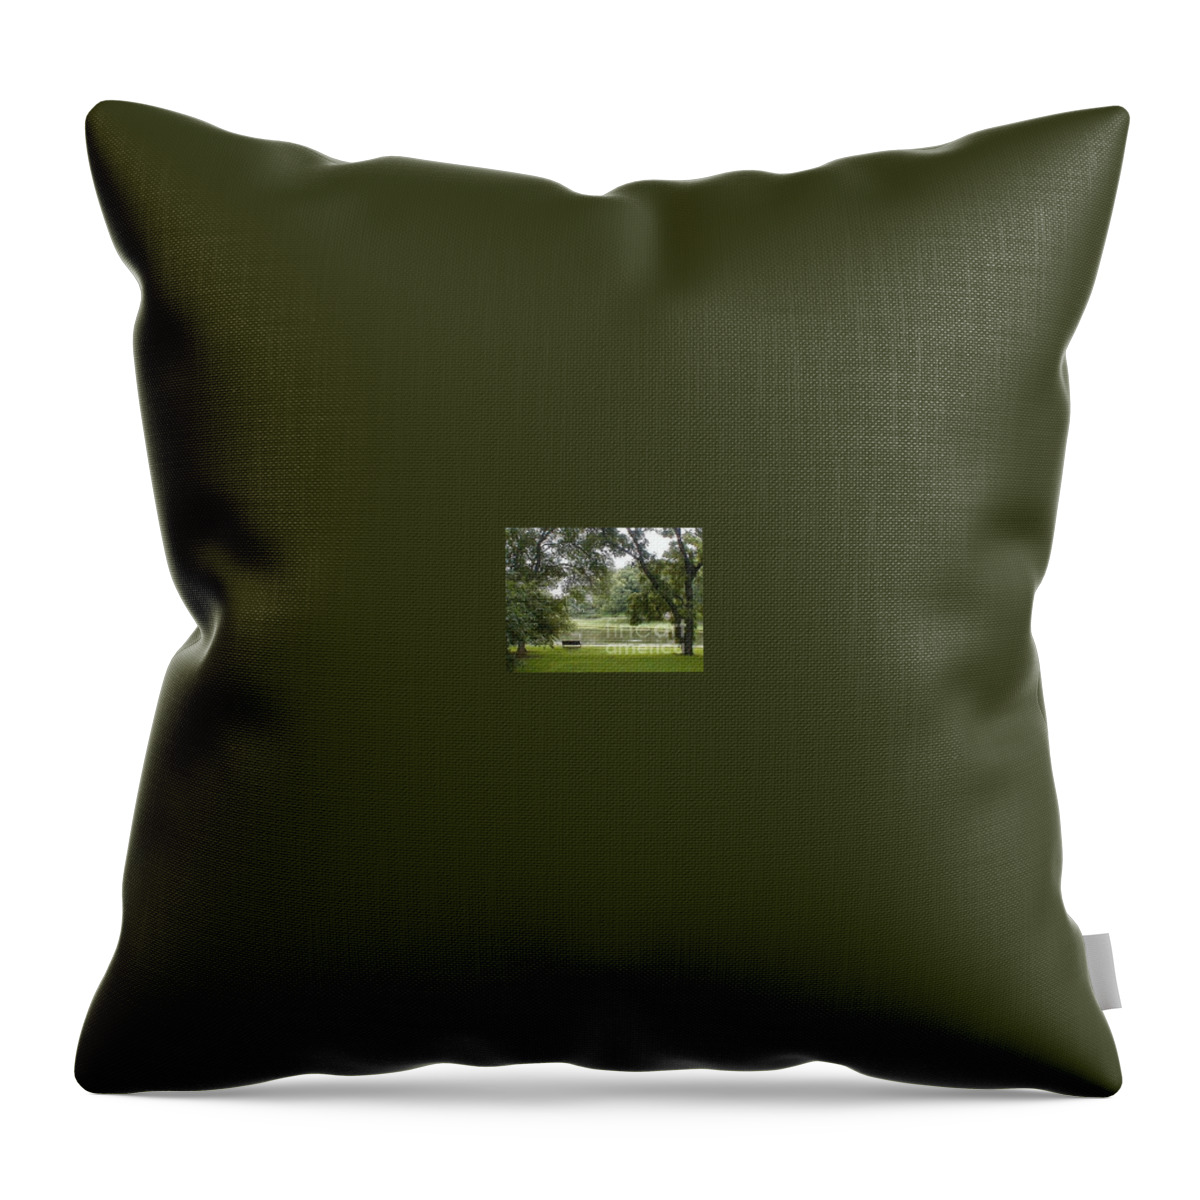 Bench Throw Pillow featuring the photograph A Quiet Place by Vonda Lawson-Rosa